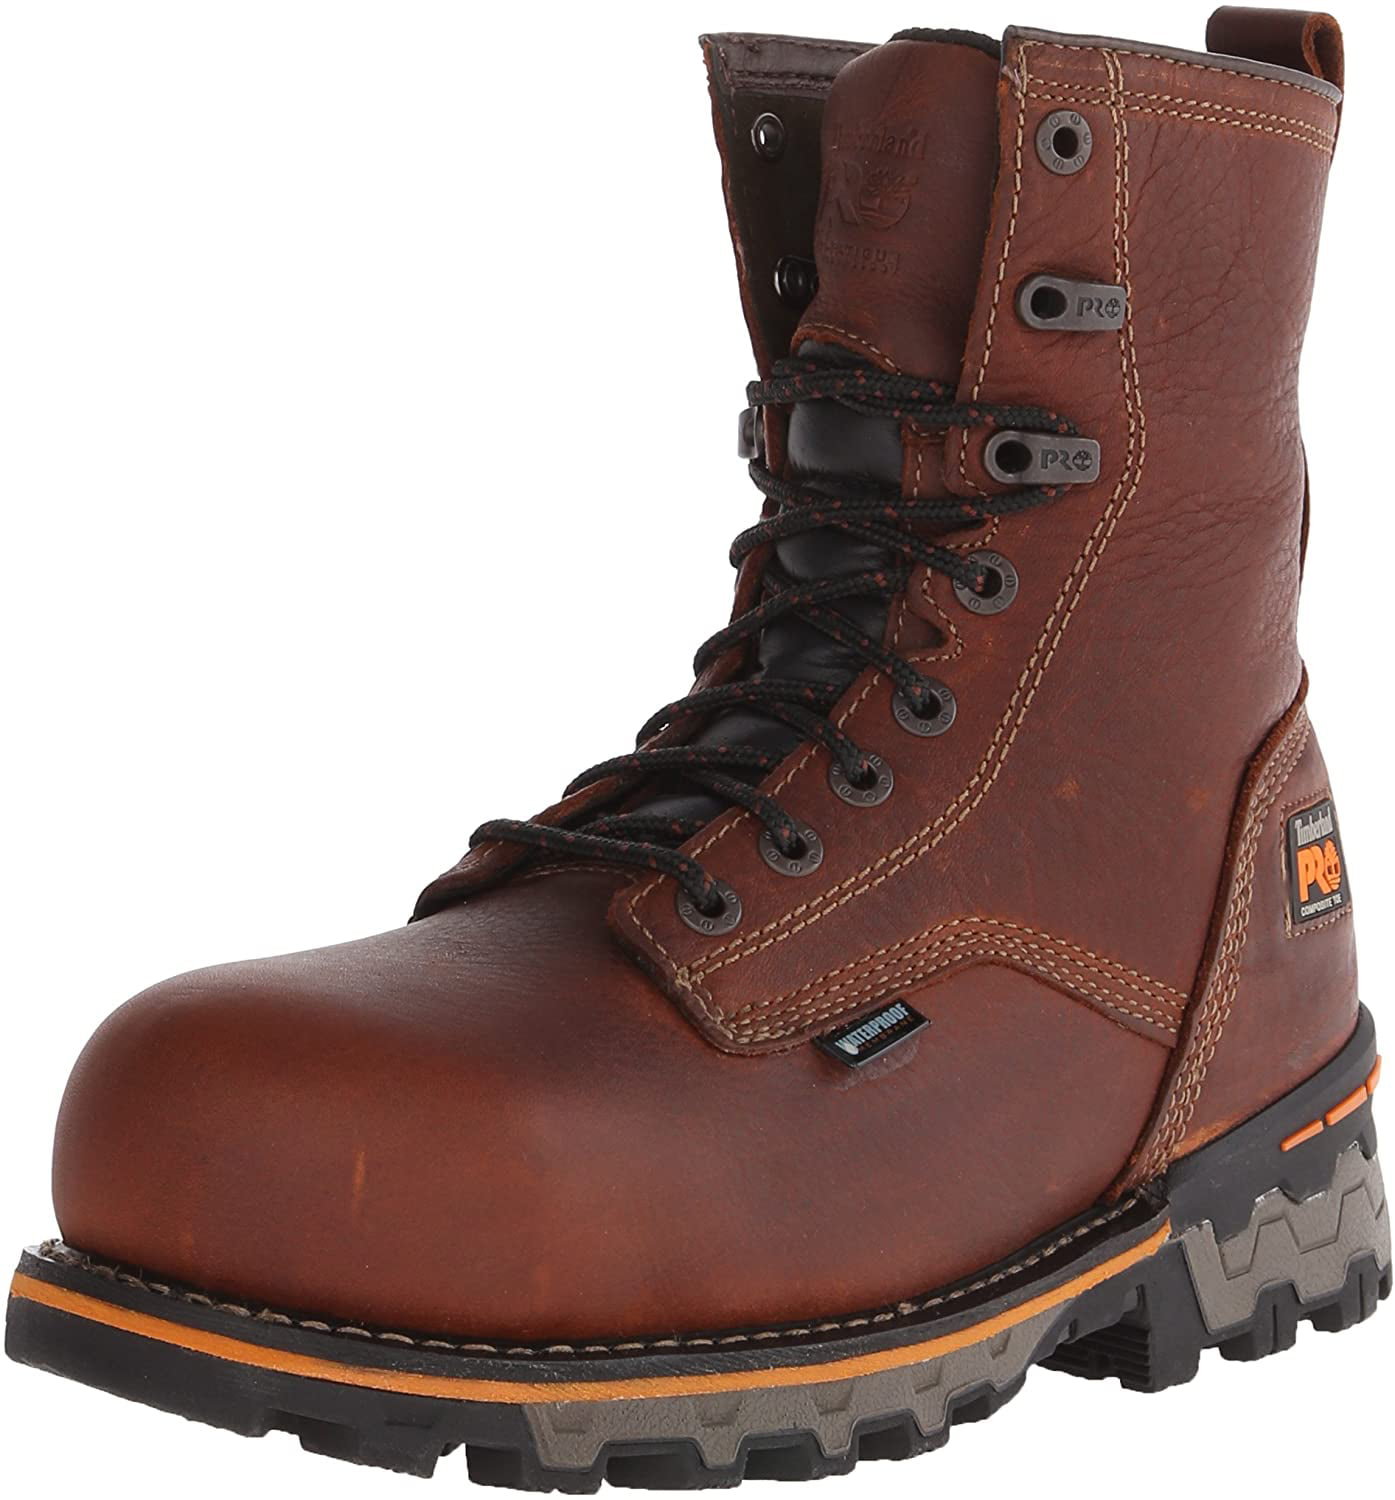 men's 8 inch hiking boots